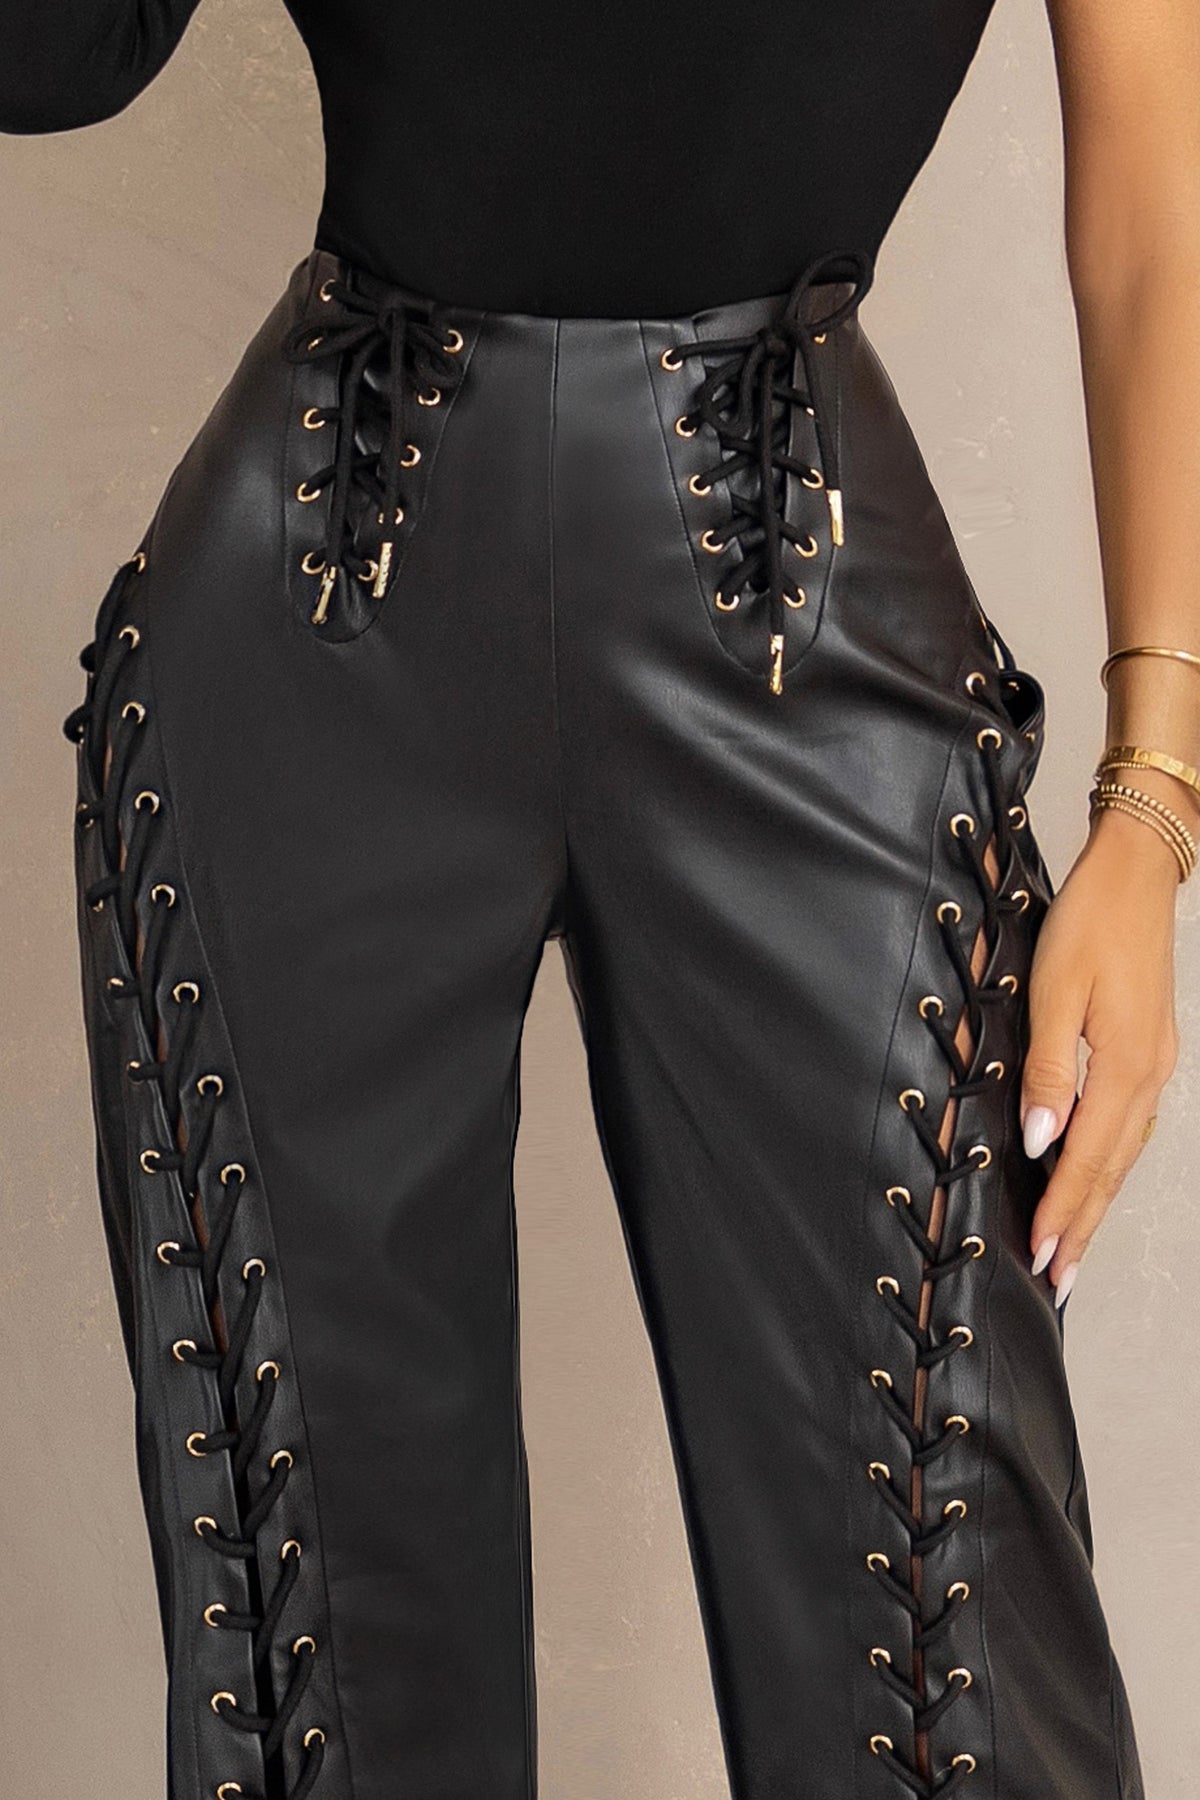 Petite Chocolate Lace Up Faux Leather Trousers  PrettyLittleThing